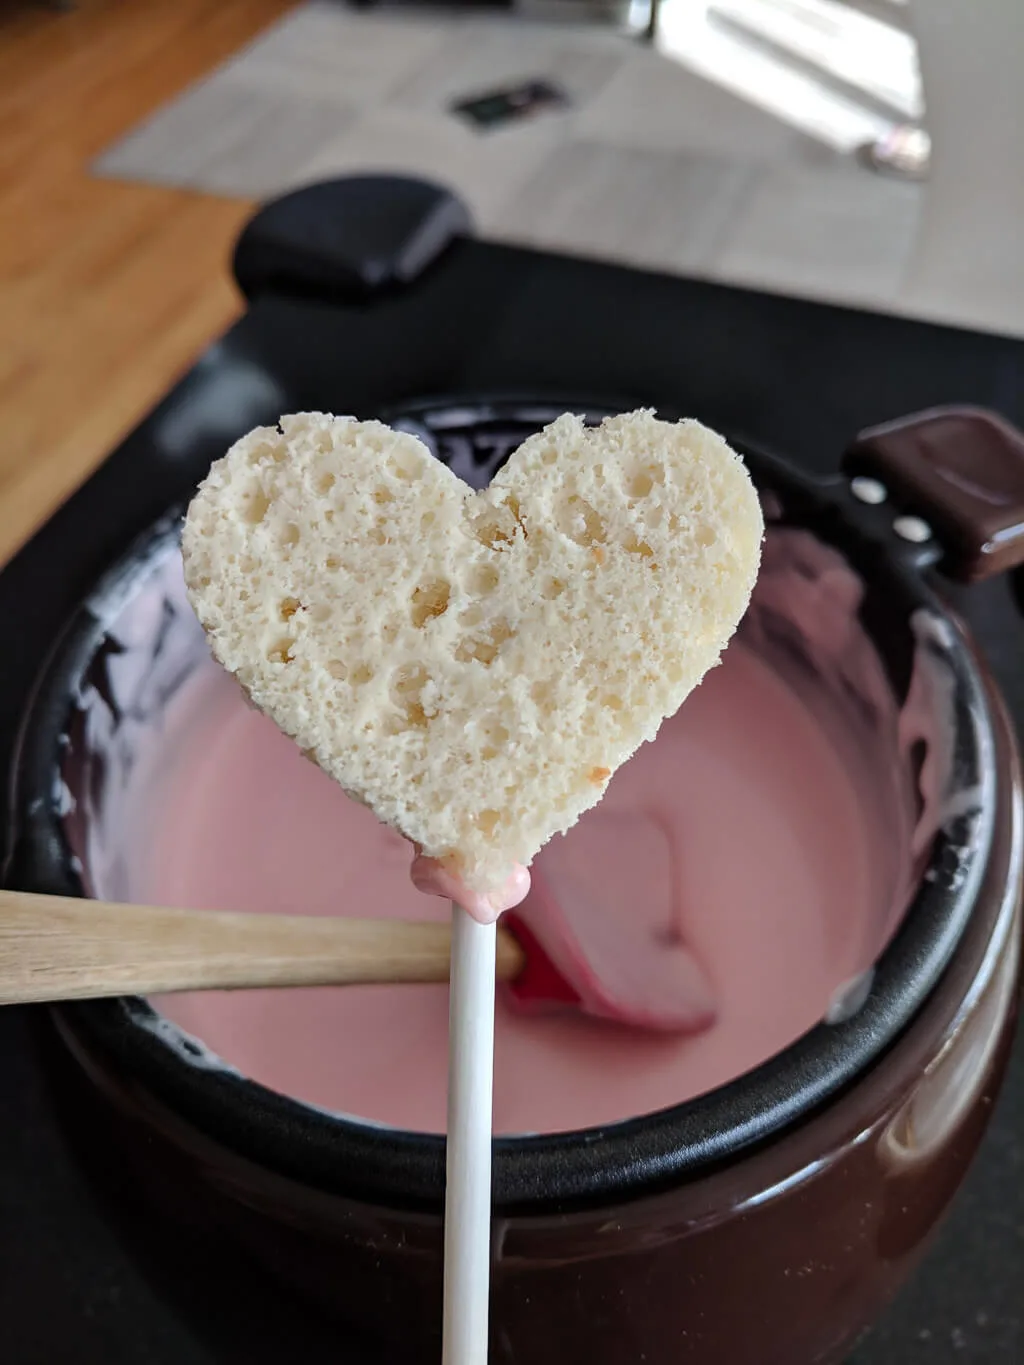 Heart cake pop before dipping